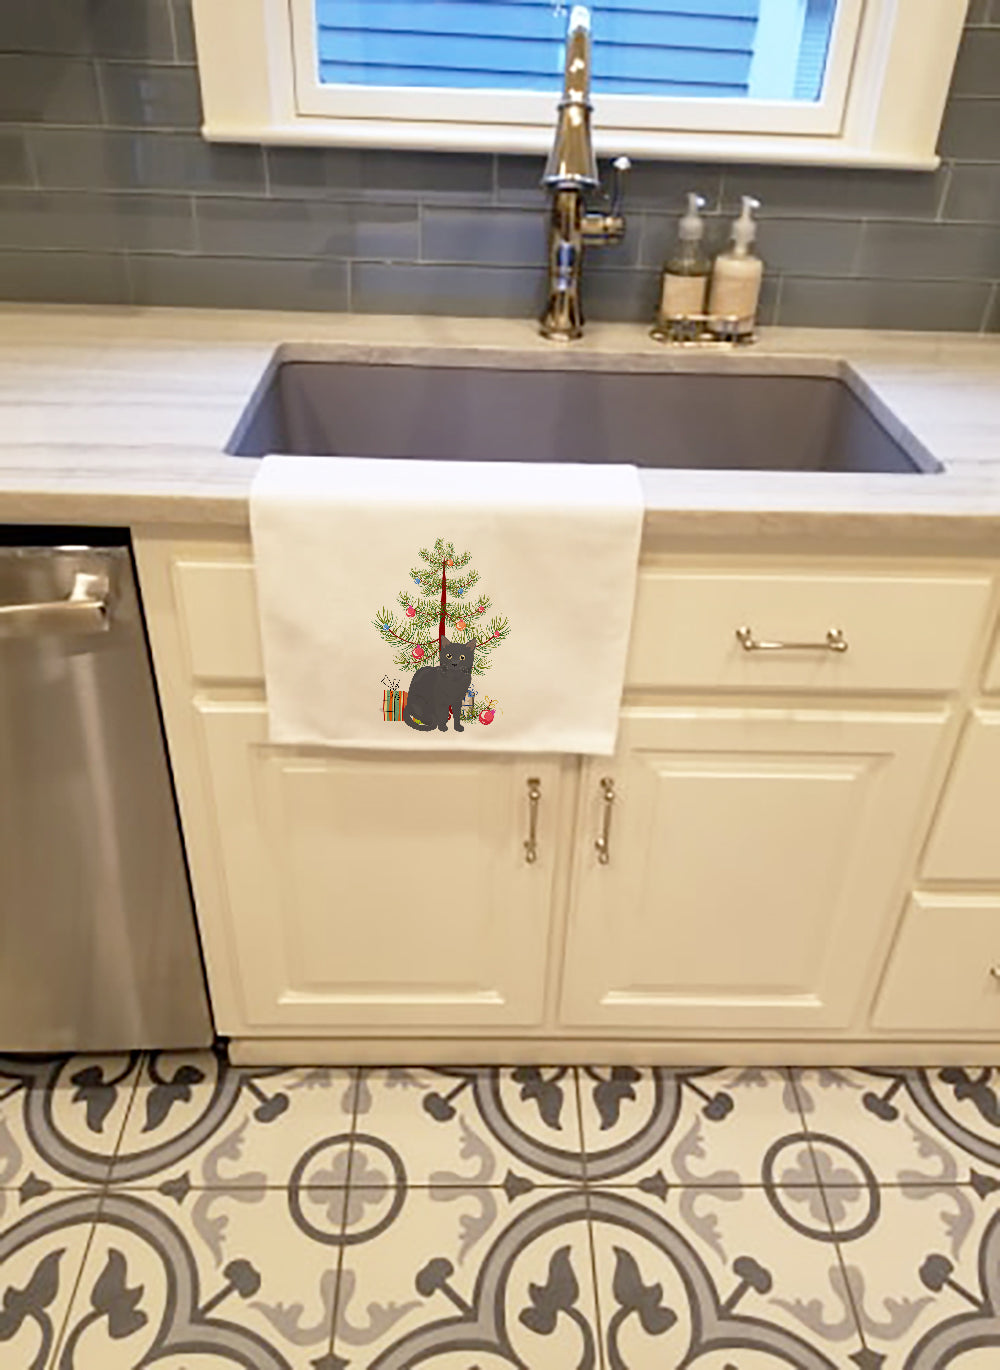 Buy this Nebelung Cat Merry Christmas White Kitchen Towel Set of 2